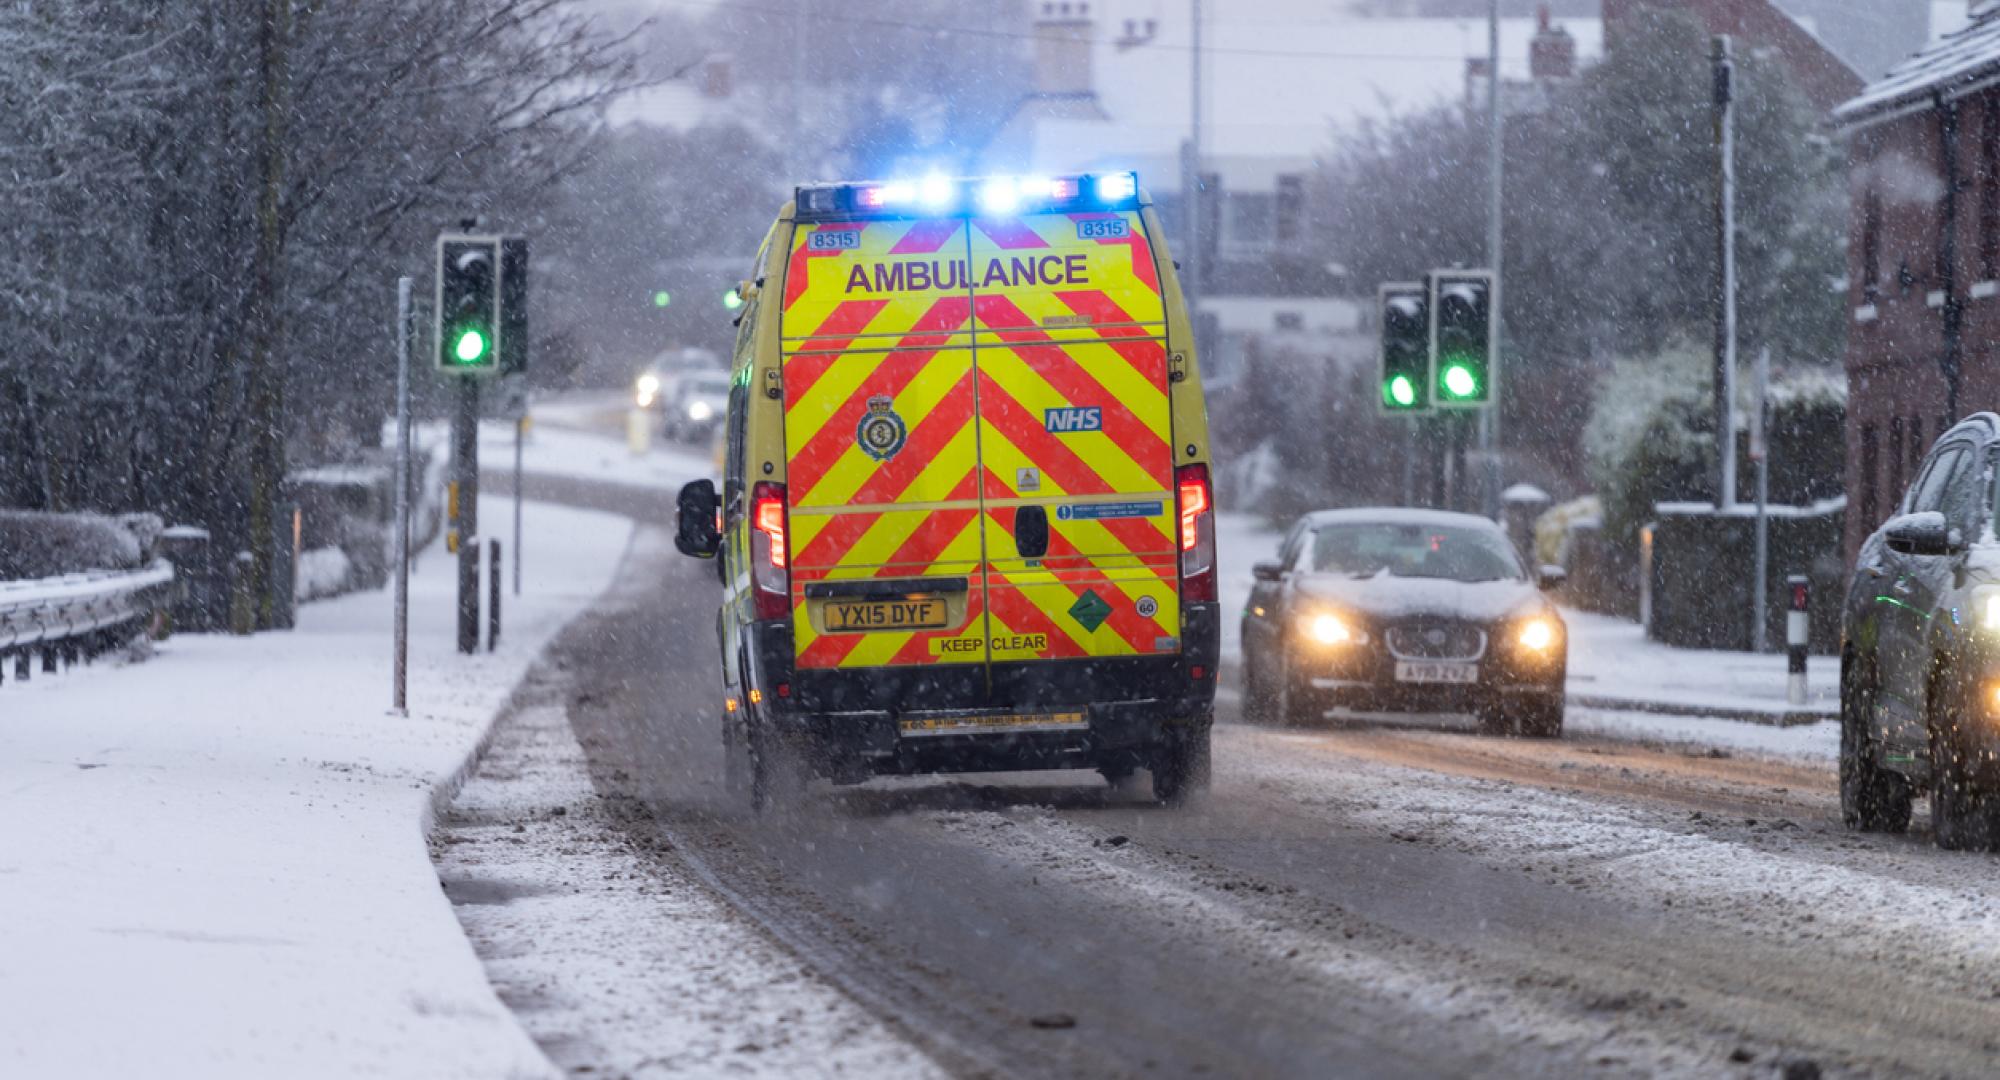 Ambulance in the snow depicting NHS winter pressures